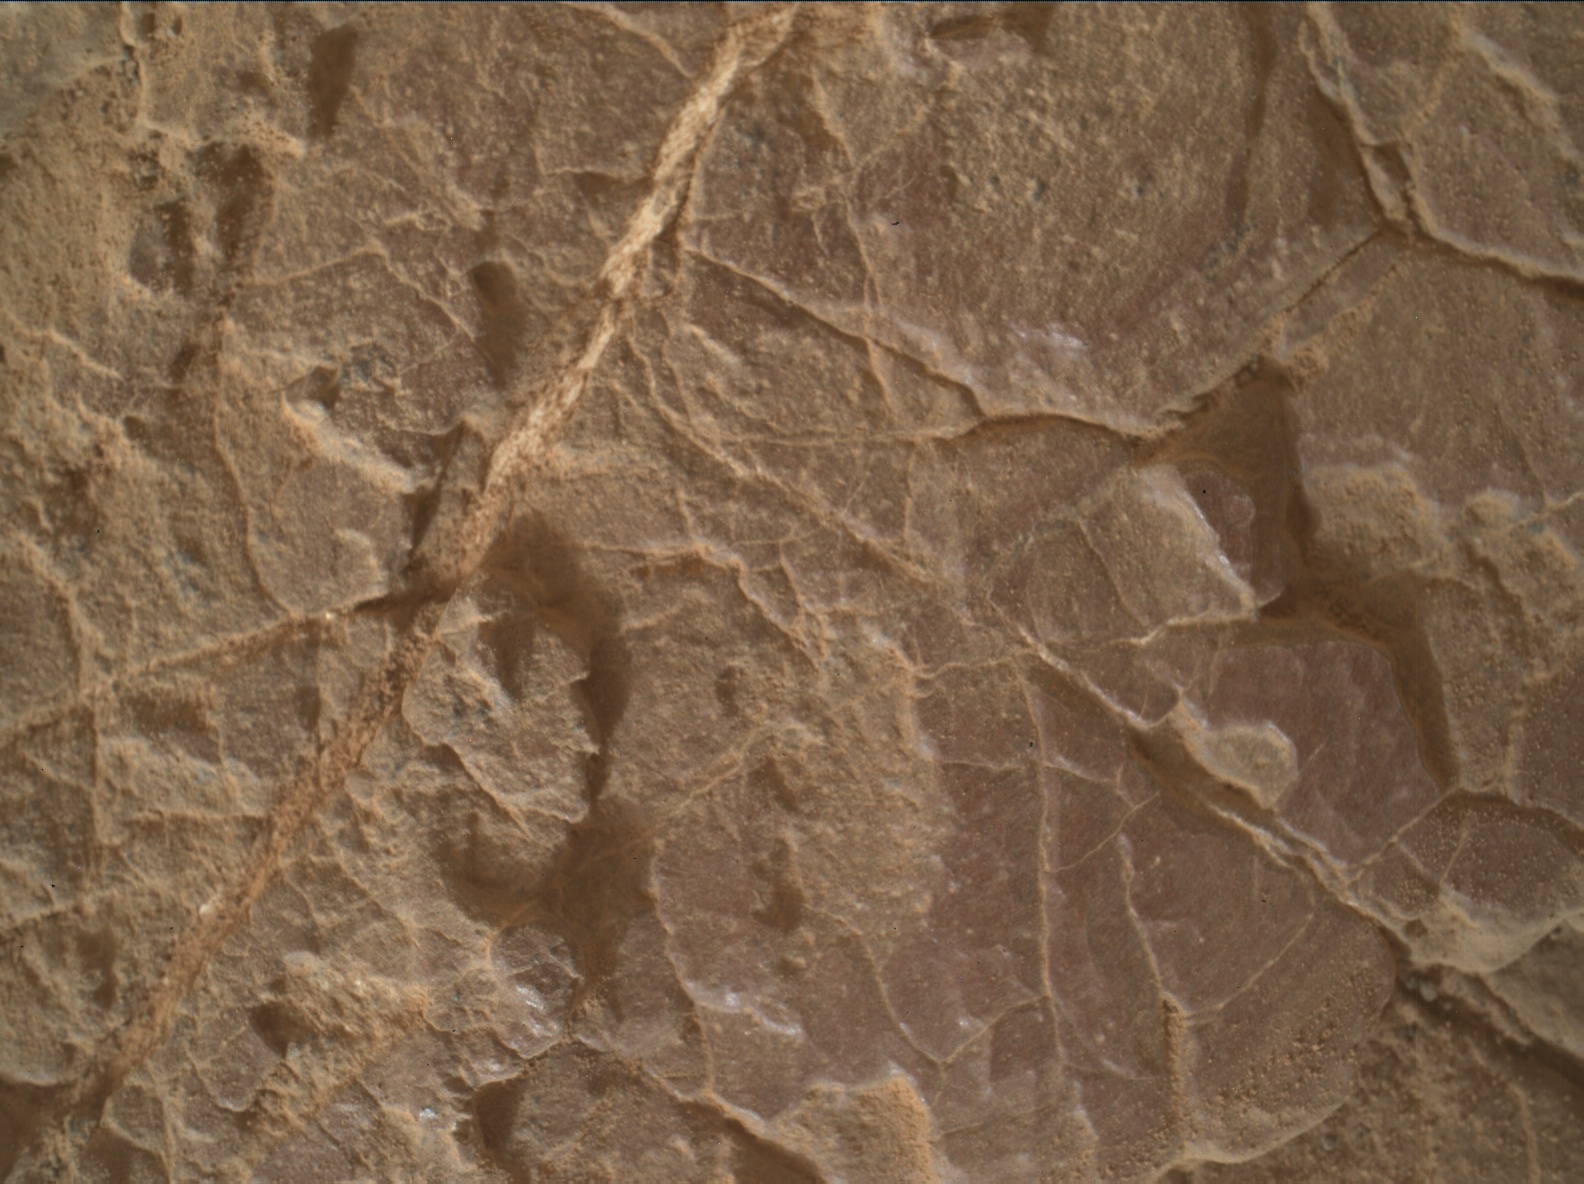 Nasa's Mars rover Curiosity acquired this image using its Mars Hand Lens Imager (MAHLI) on Sol 2318